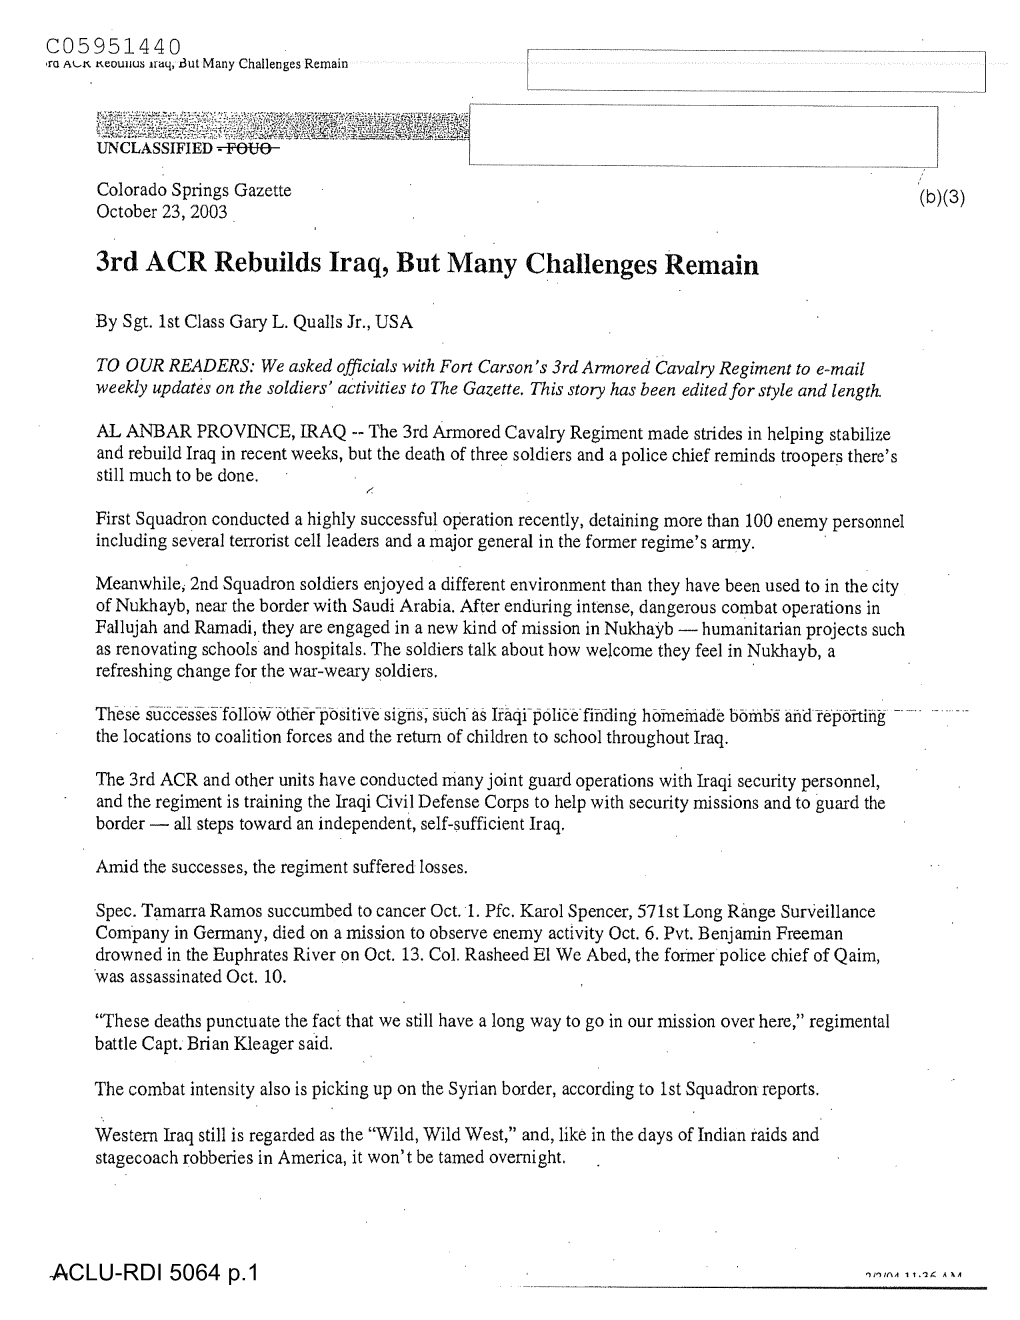 3Rd ACR Rebuilds Iraq, but Many Challenges Remain